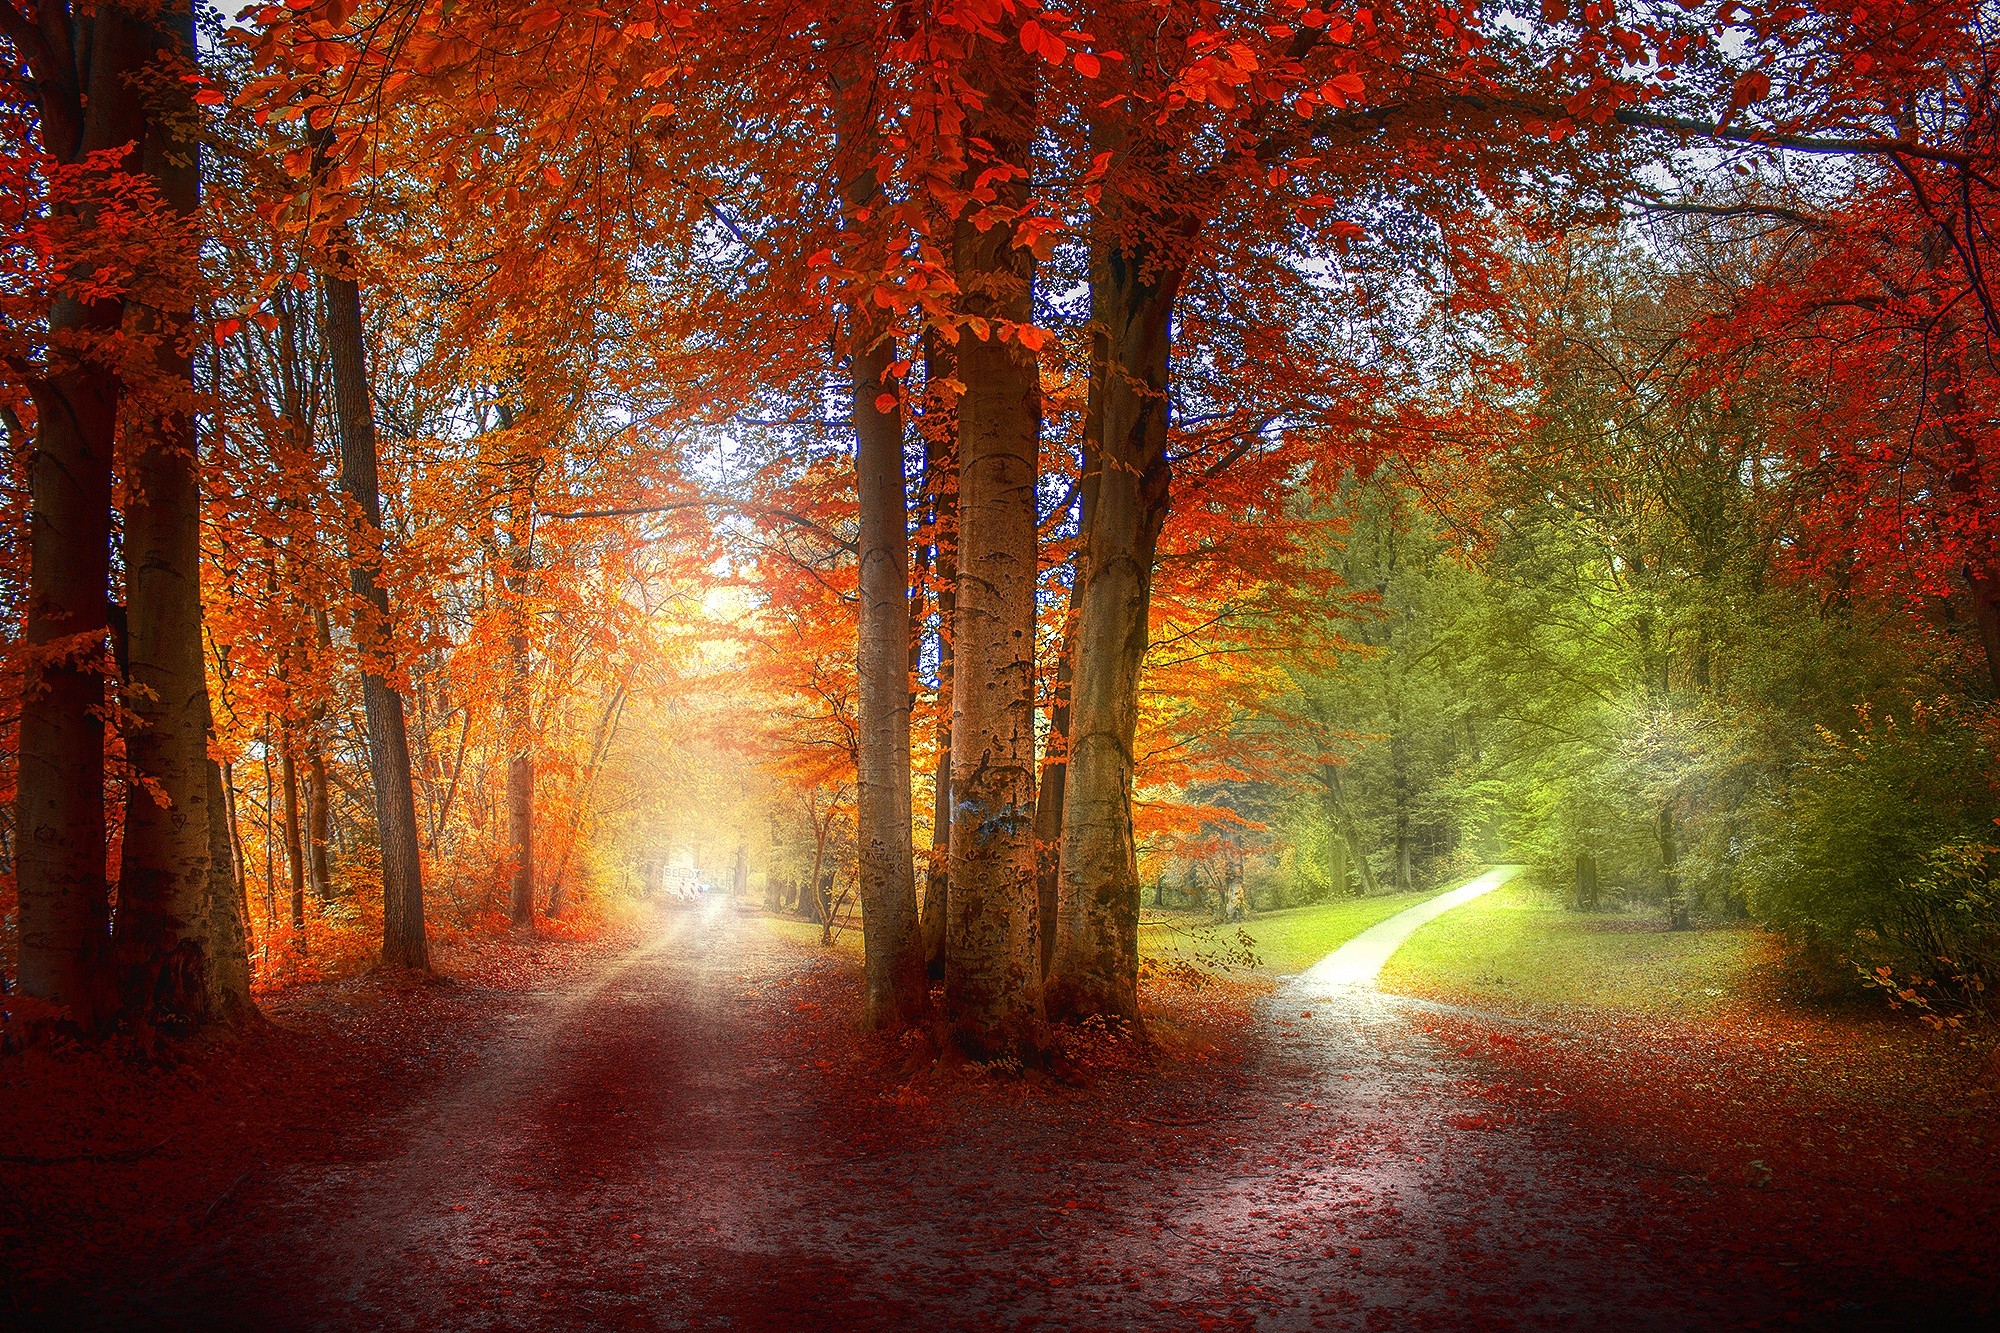 General 2000x1333 grass path red green orange nature landscape trees fall leaves